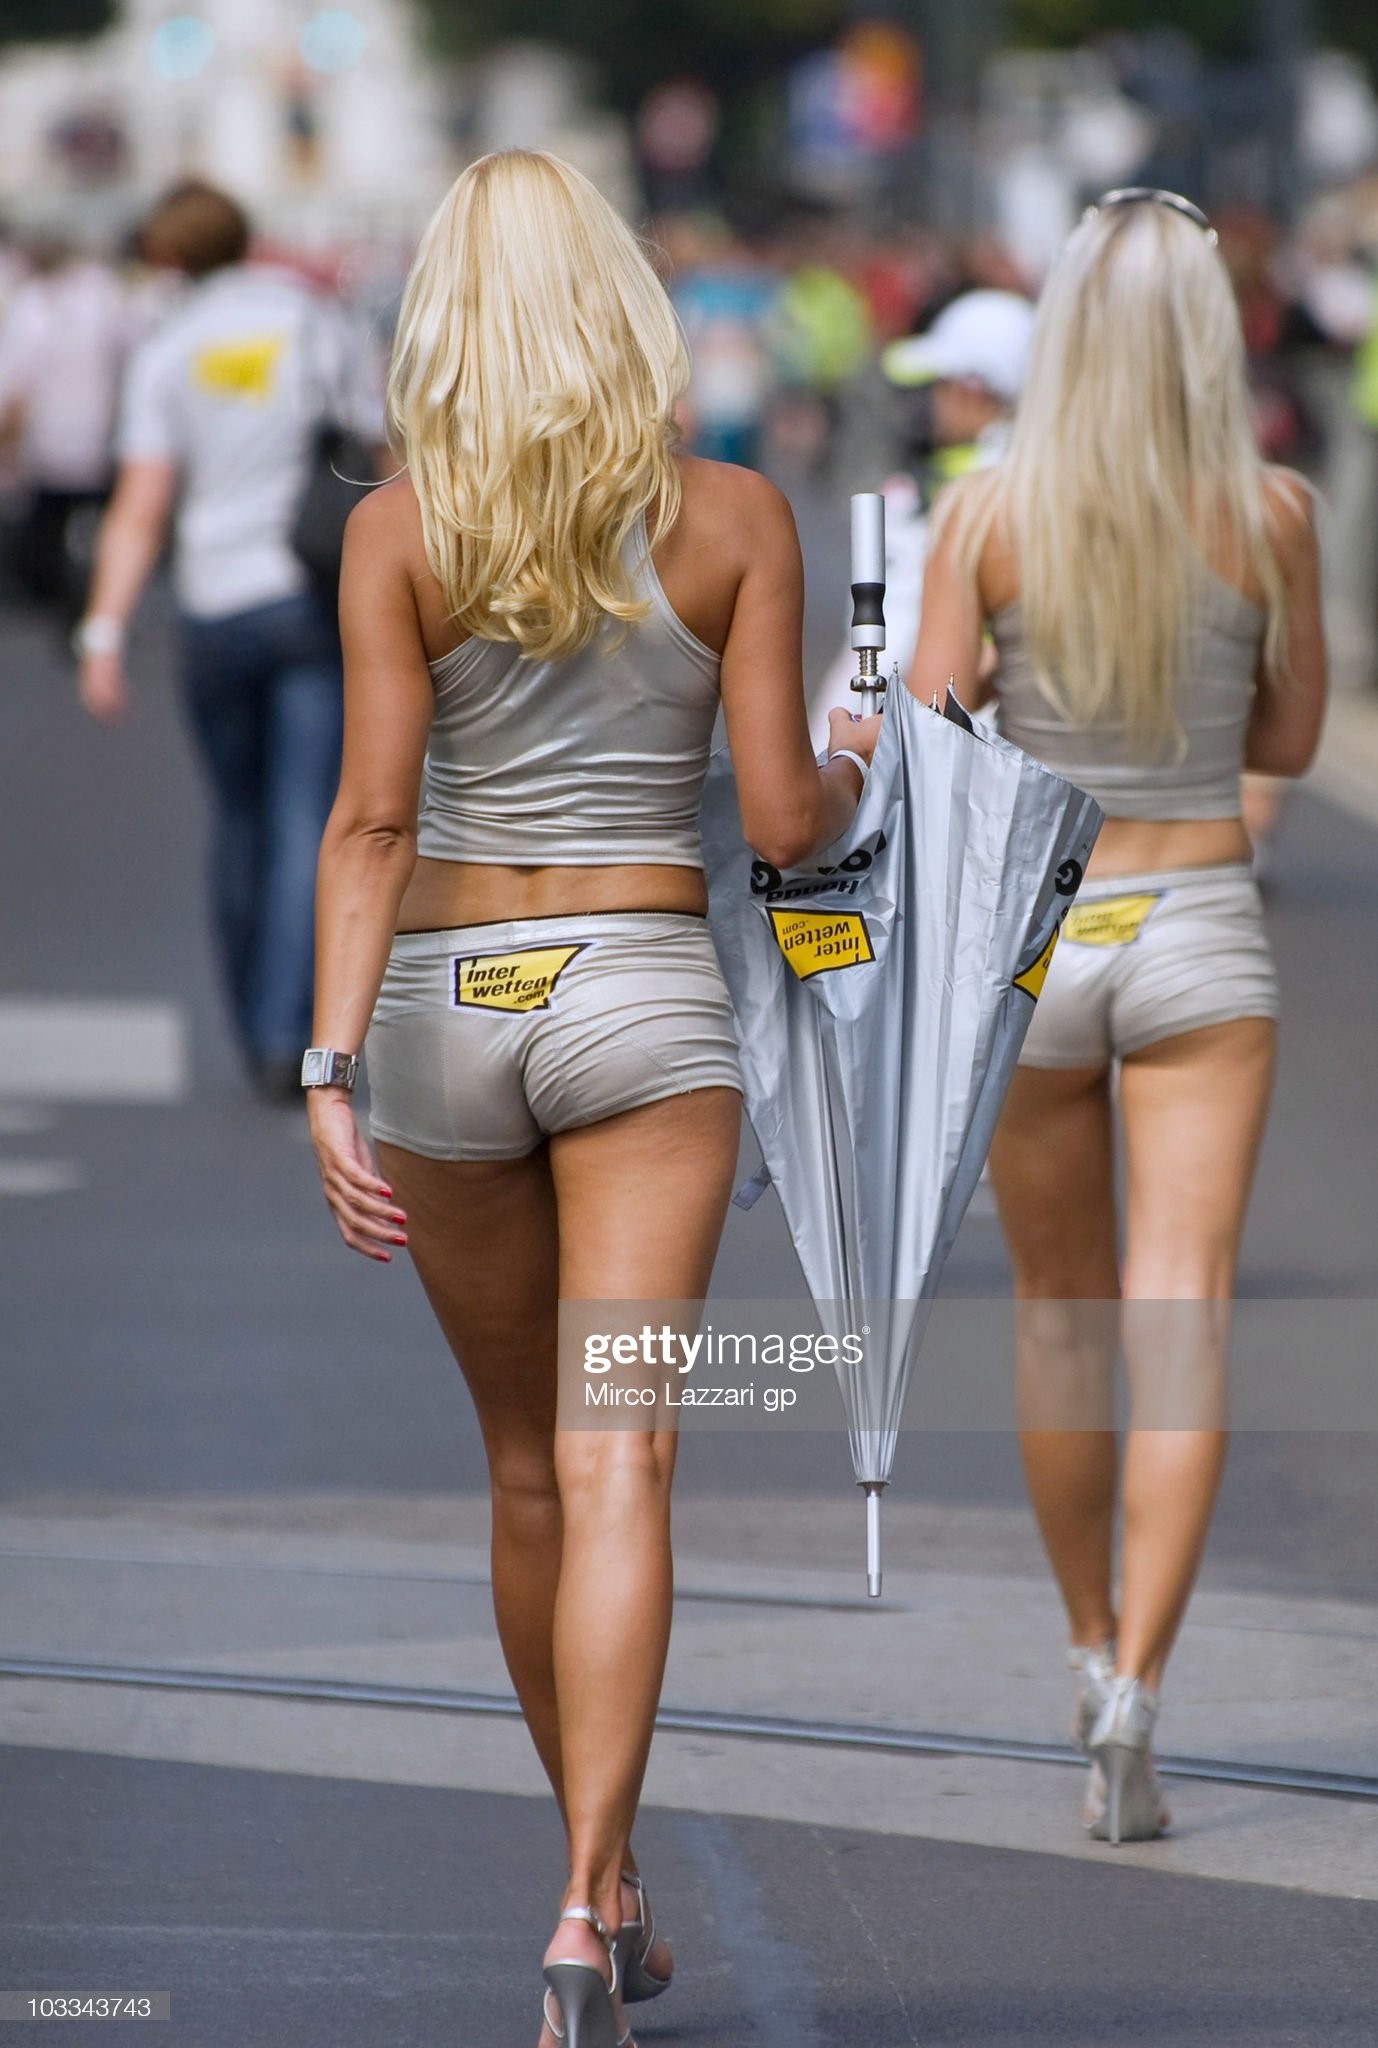 Grid girls from Interwetten MotoGP Team walk in front of fans during the pre-event 